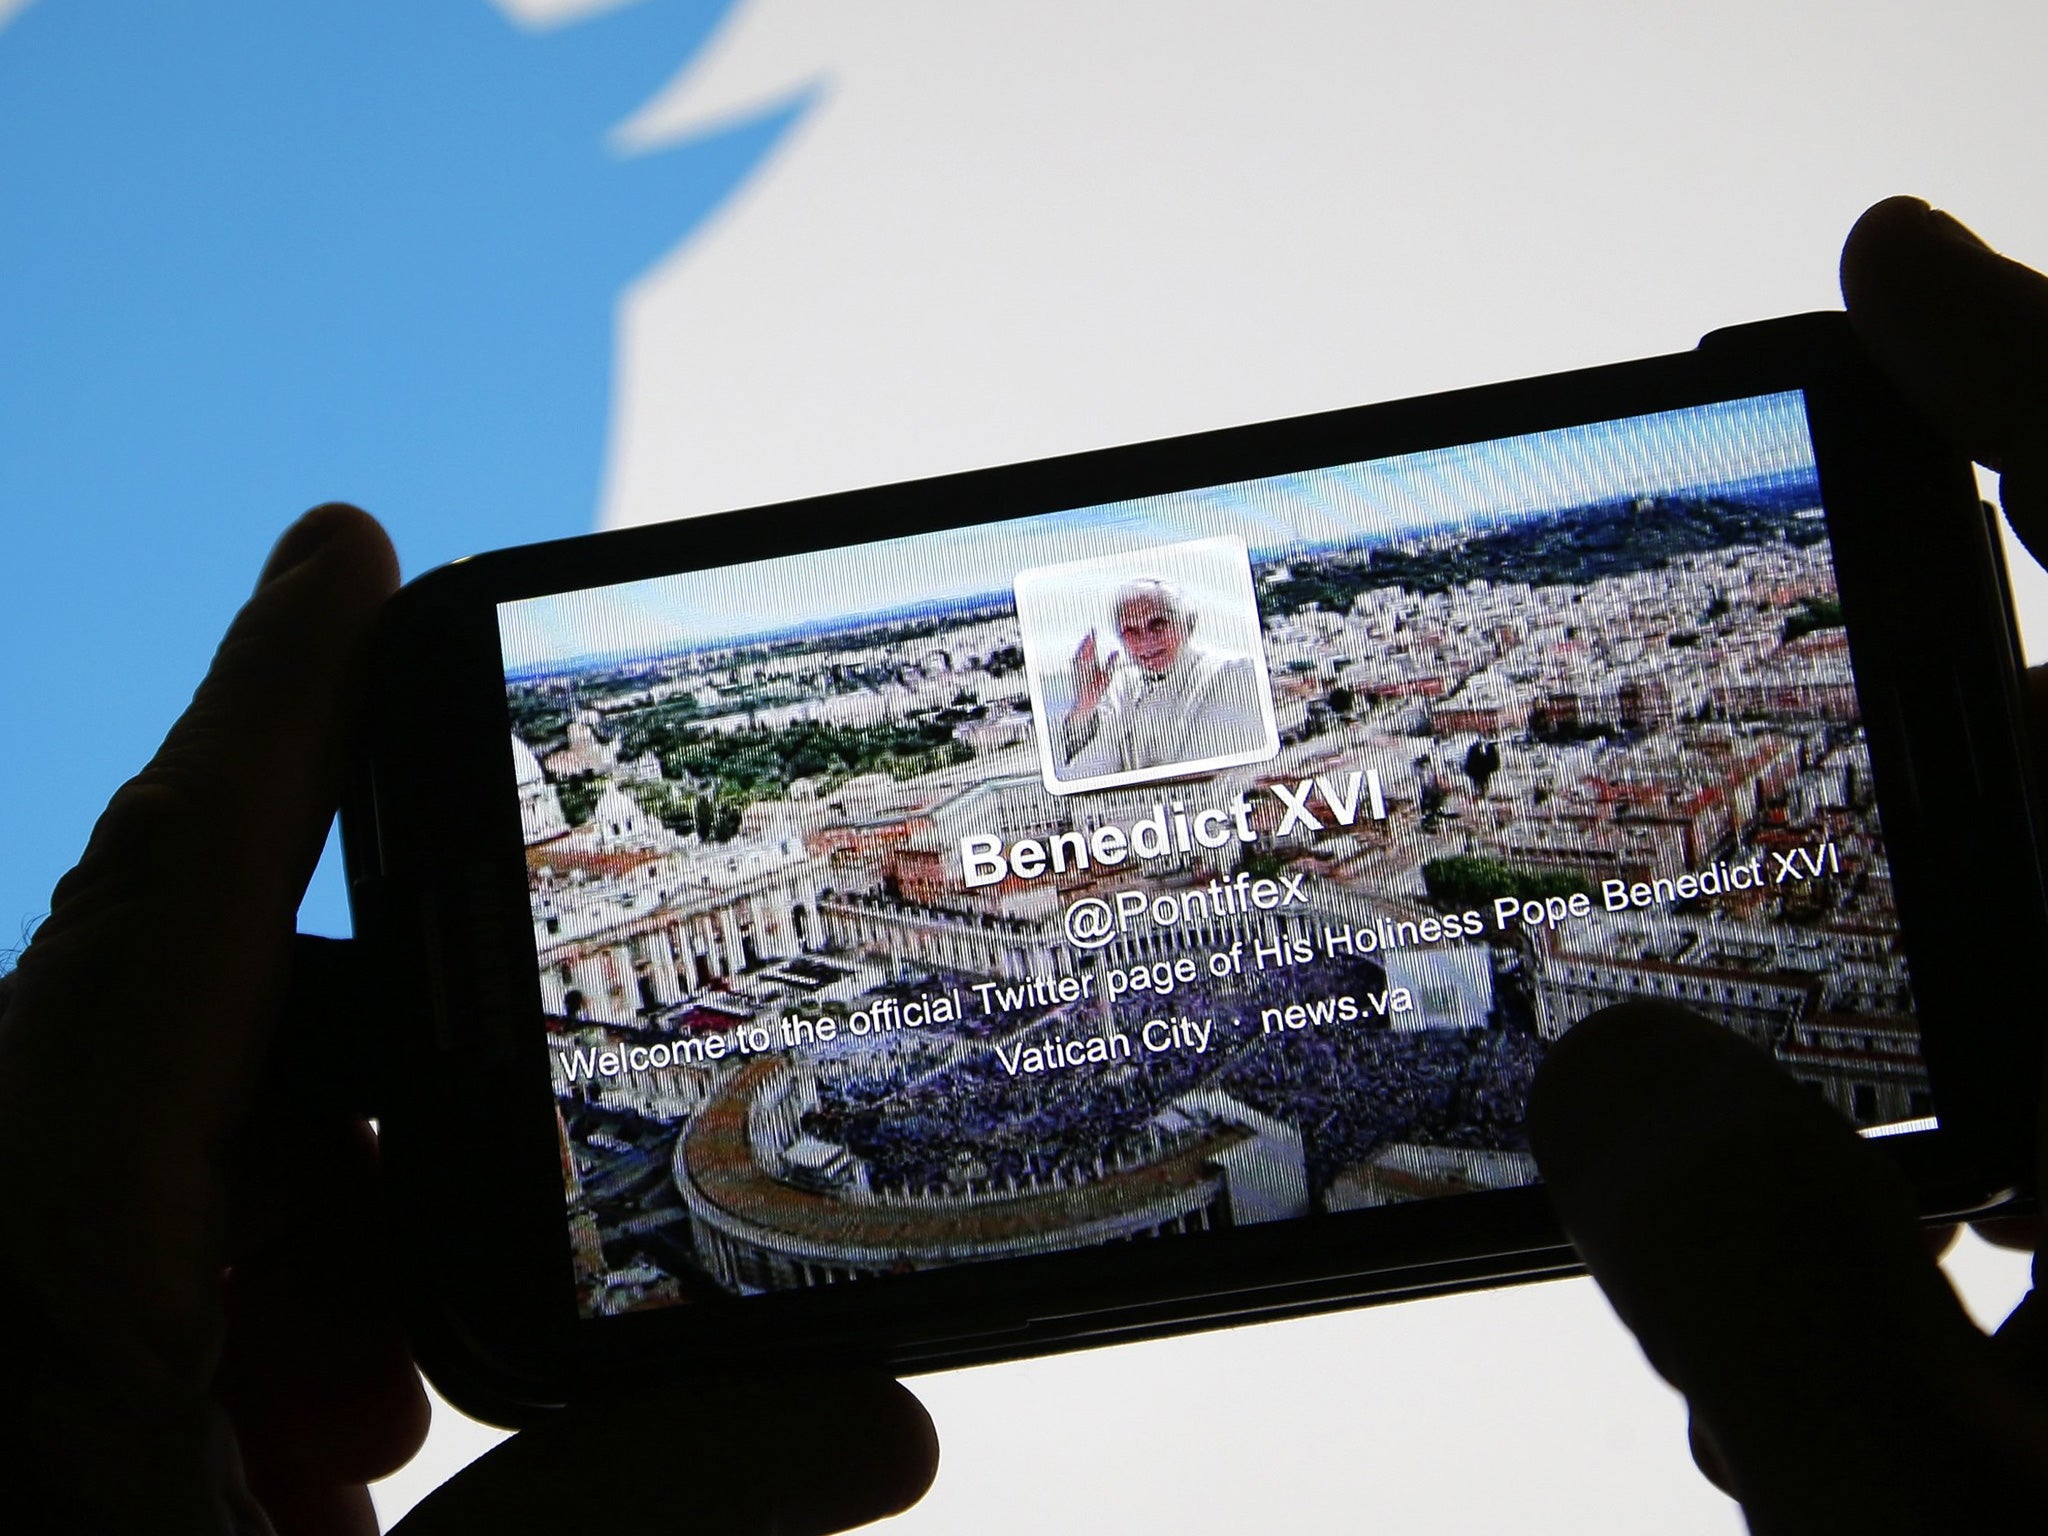 Pope Benedict will tweet ‘as often as he likes in his own words’